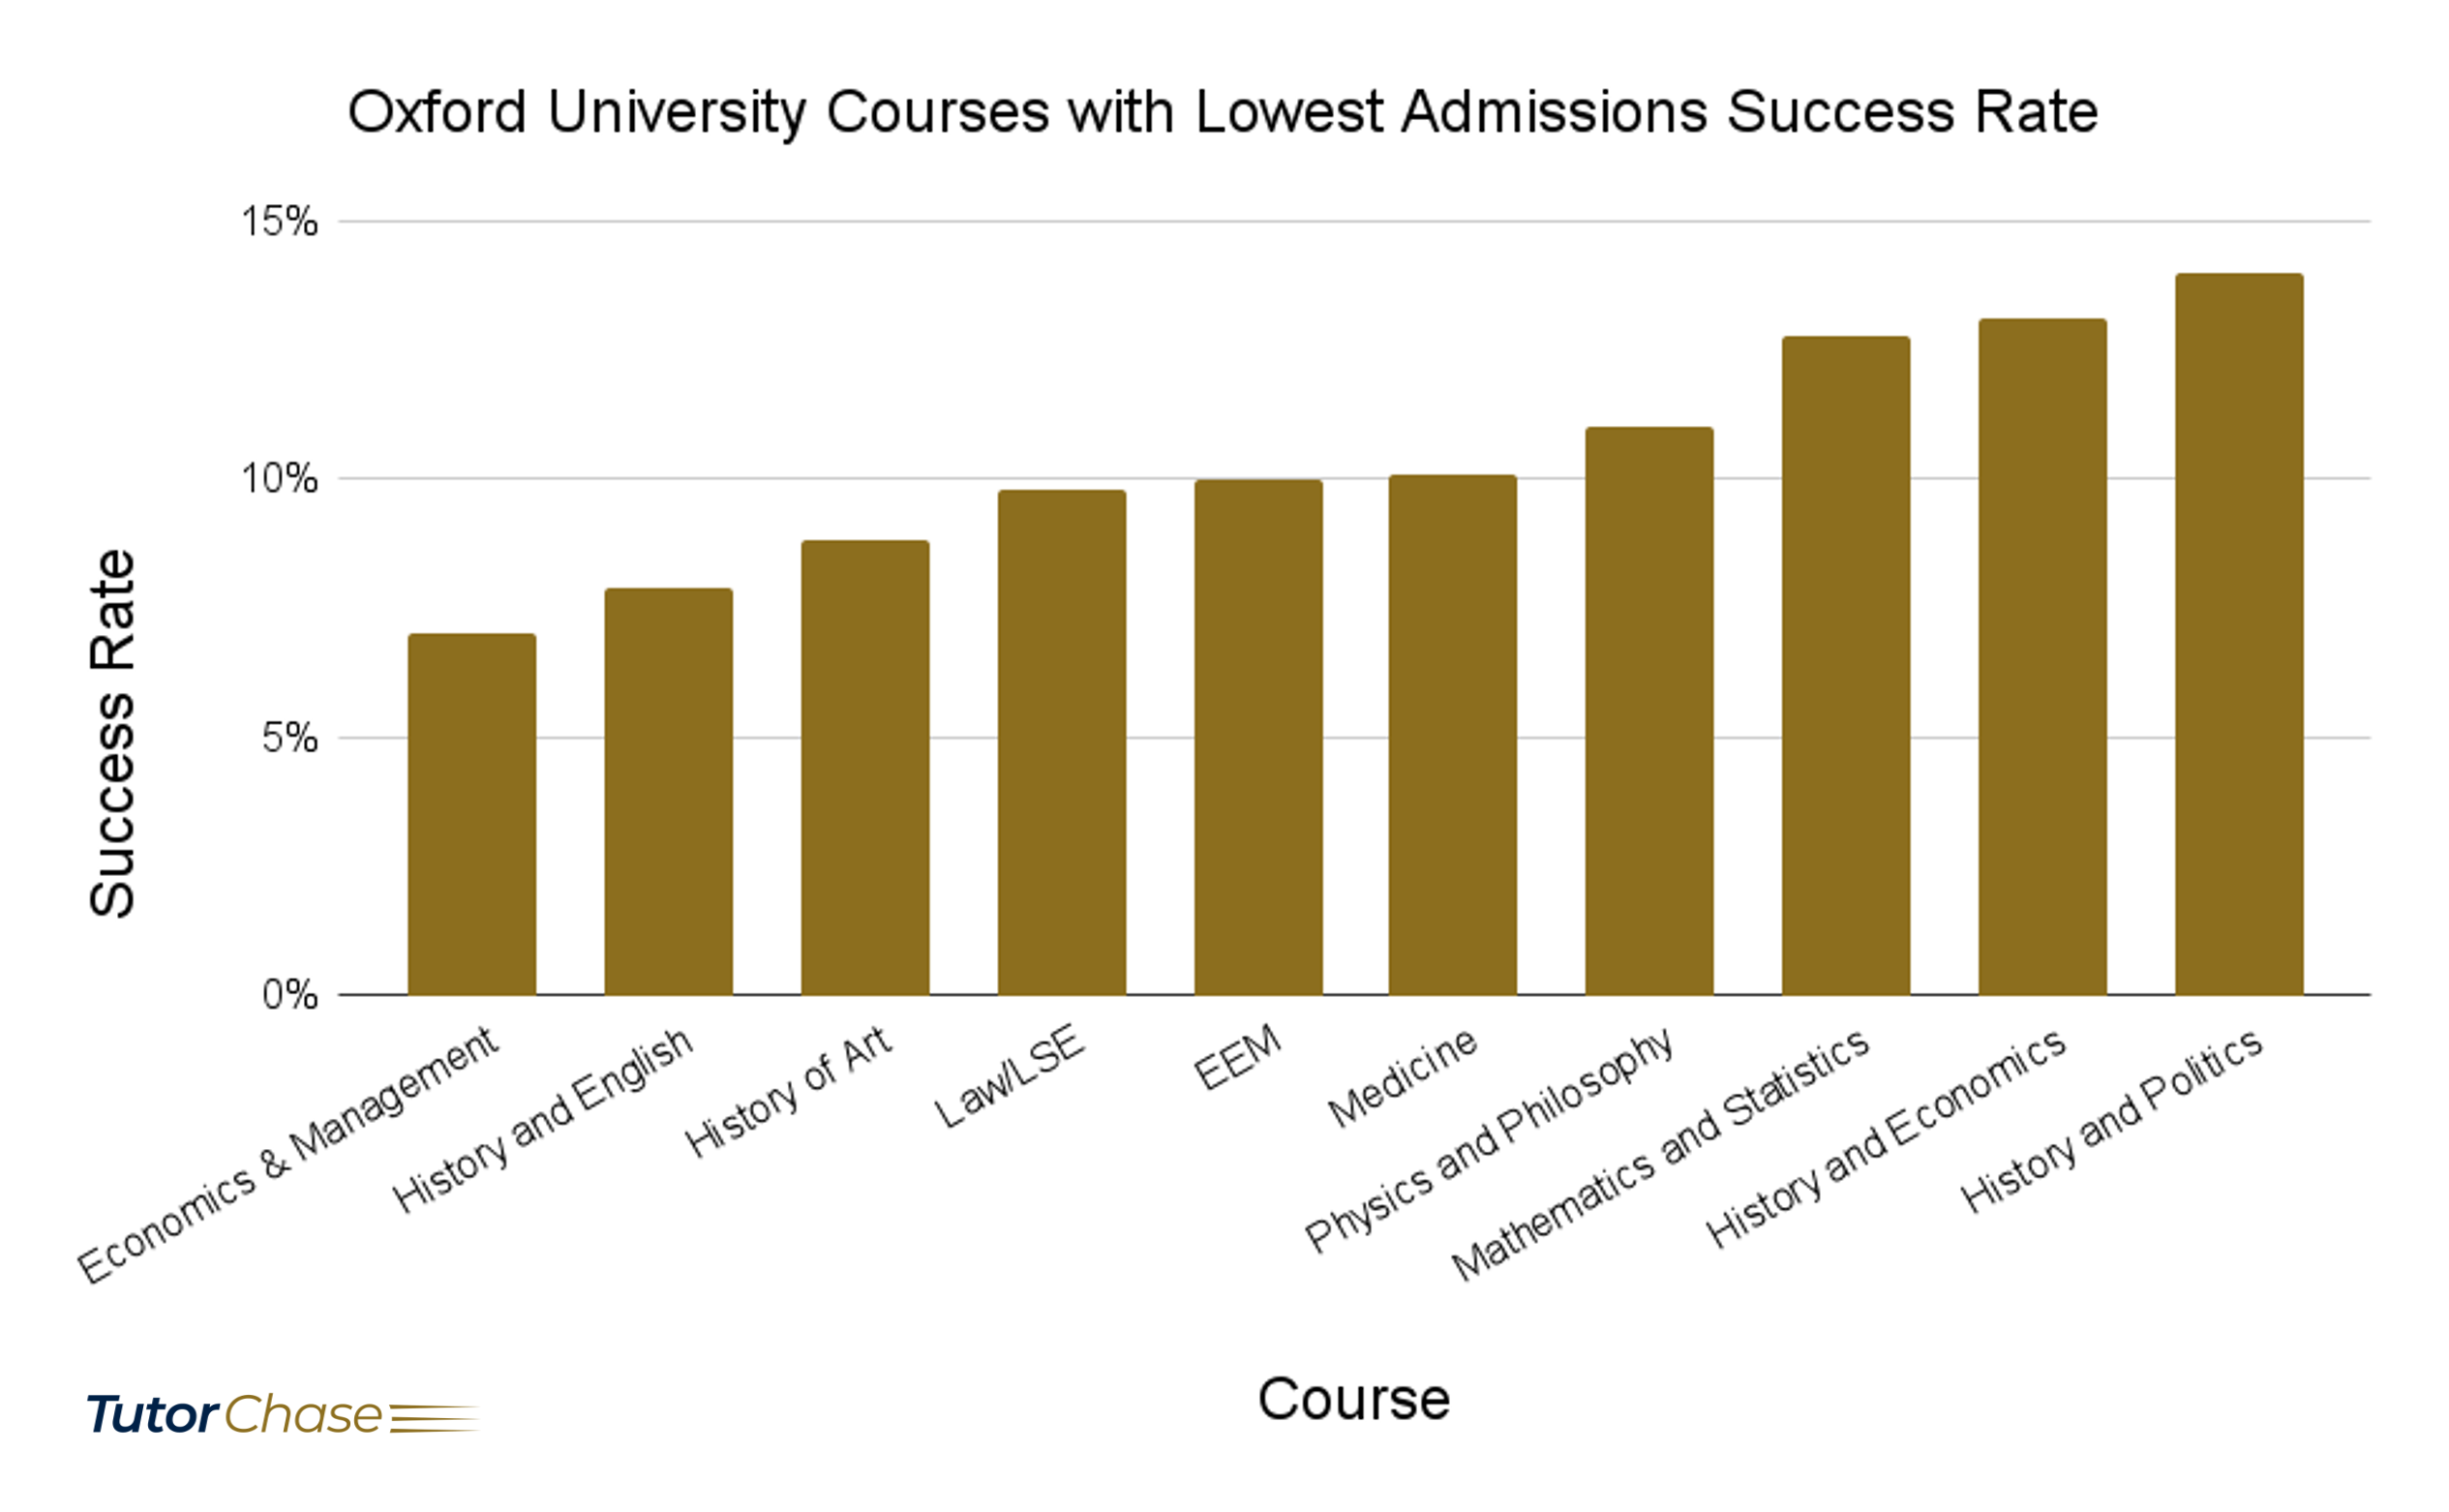 Oxford University Courses with Lowest Admissions Success Rates